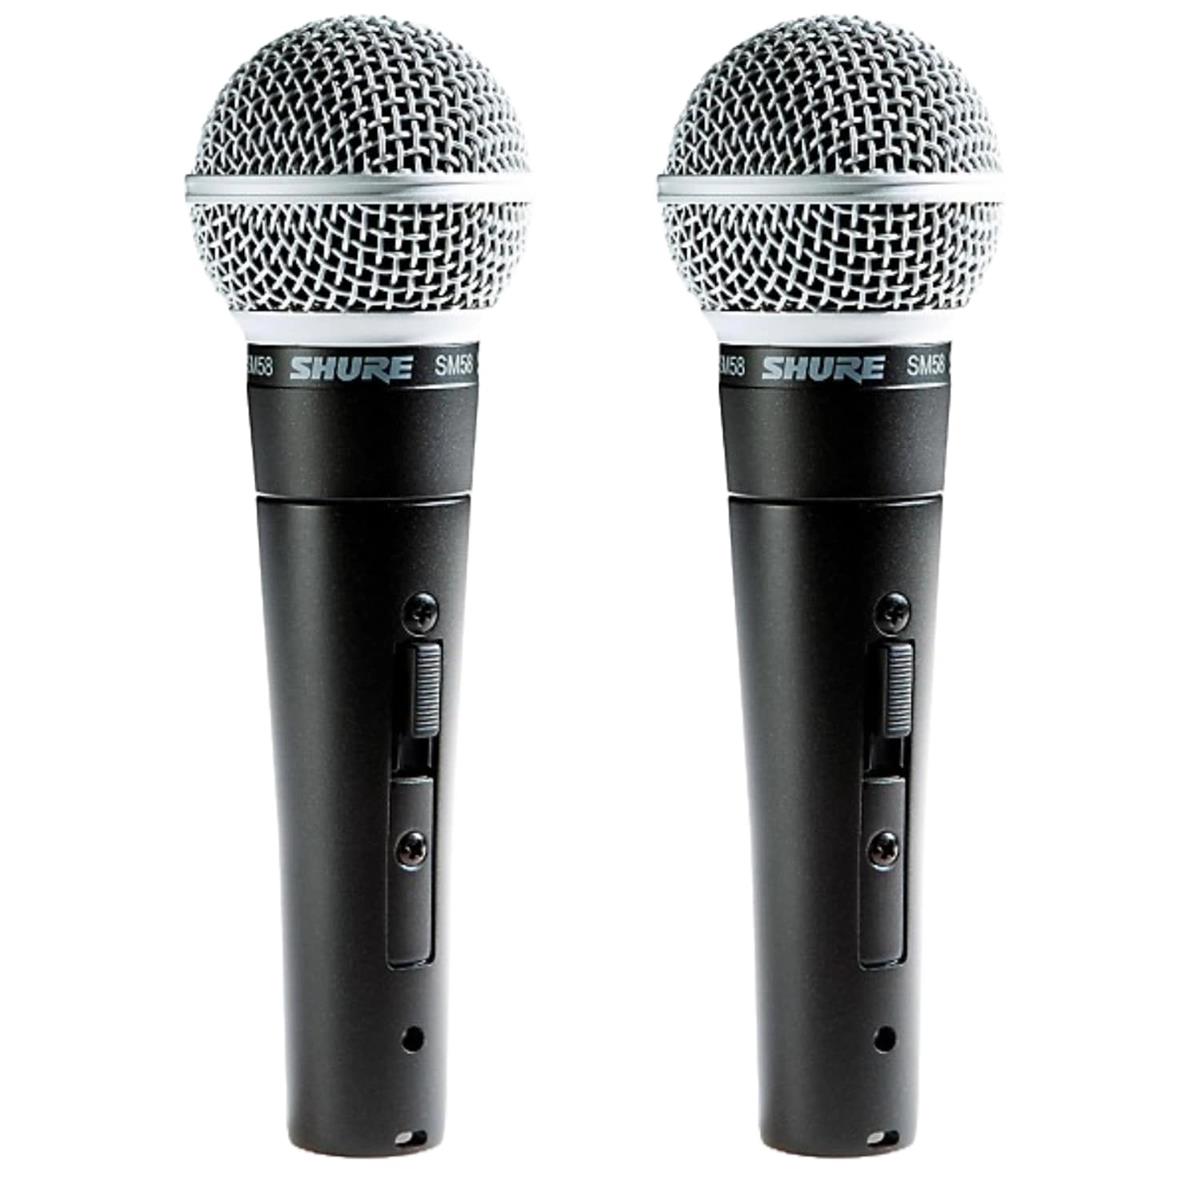 Image of Shure SM58-S Cardioid Dynamic Handheld Wired Microphone with ON / OFF Switch. 2 Pack